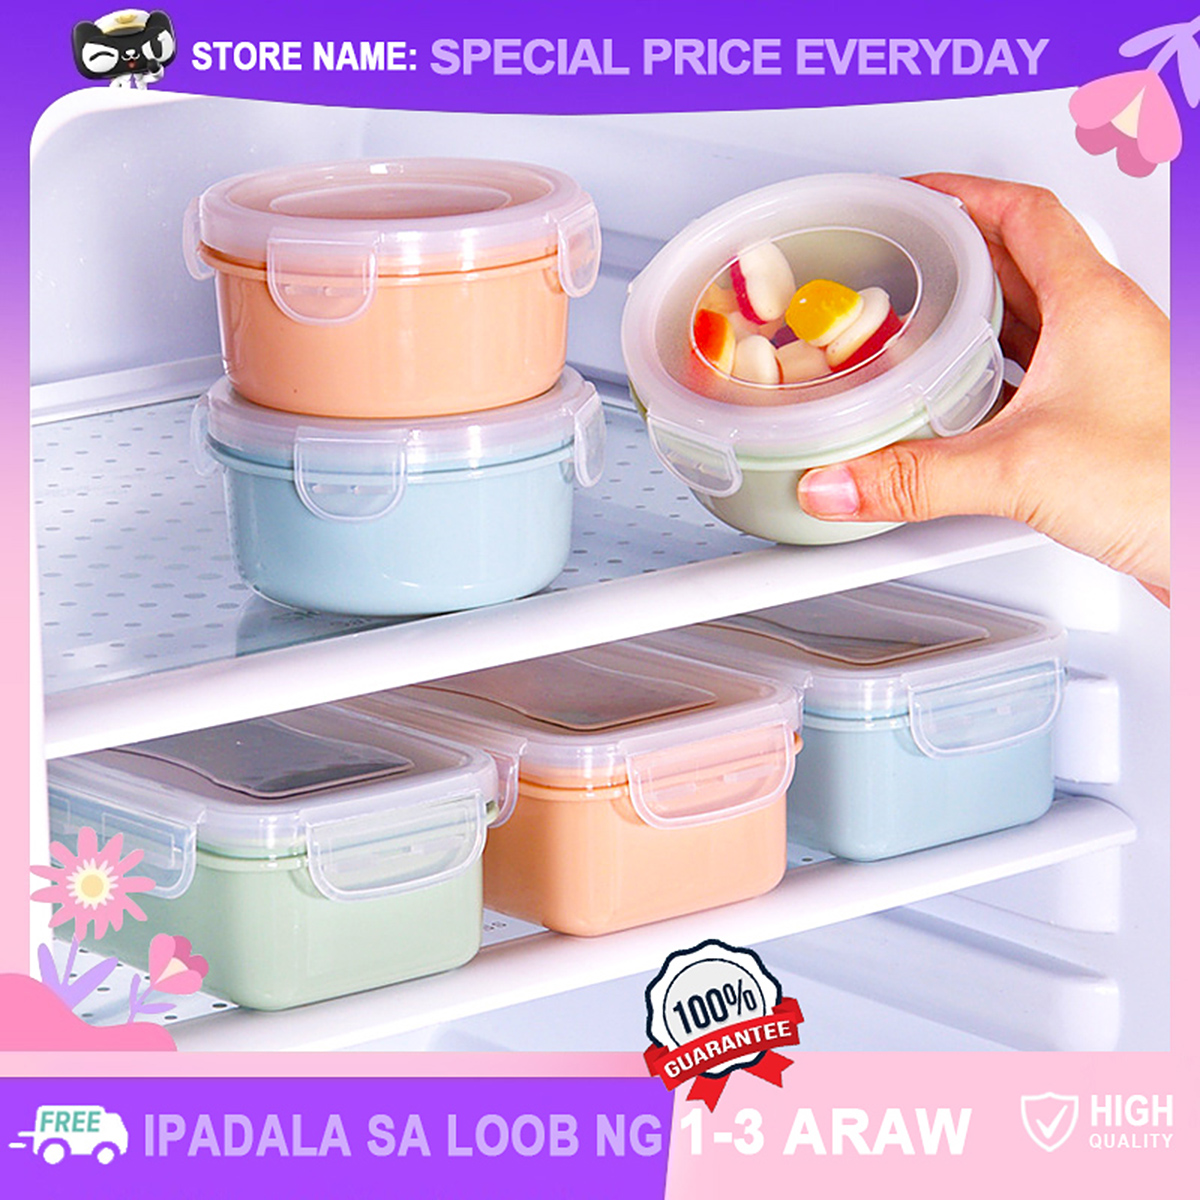 Rainbow Colored 7pcs Food Storage Containers Set With Lids, Large Capacity,  Reusable, Leak-proof, Suitable For Meal Prep, Microwave, Freezer And  Dishwasher Safe